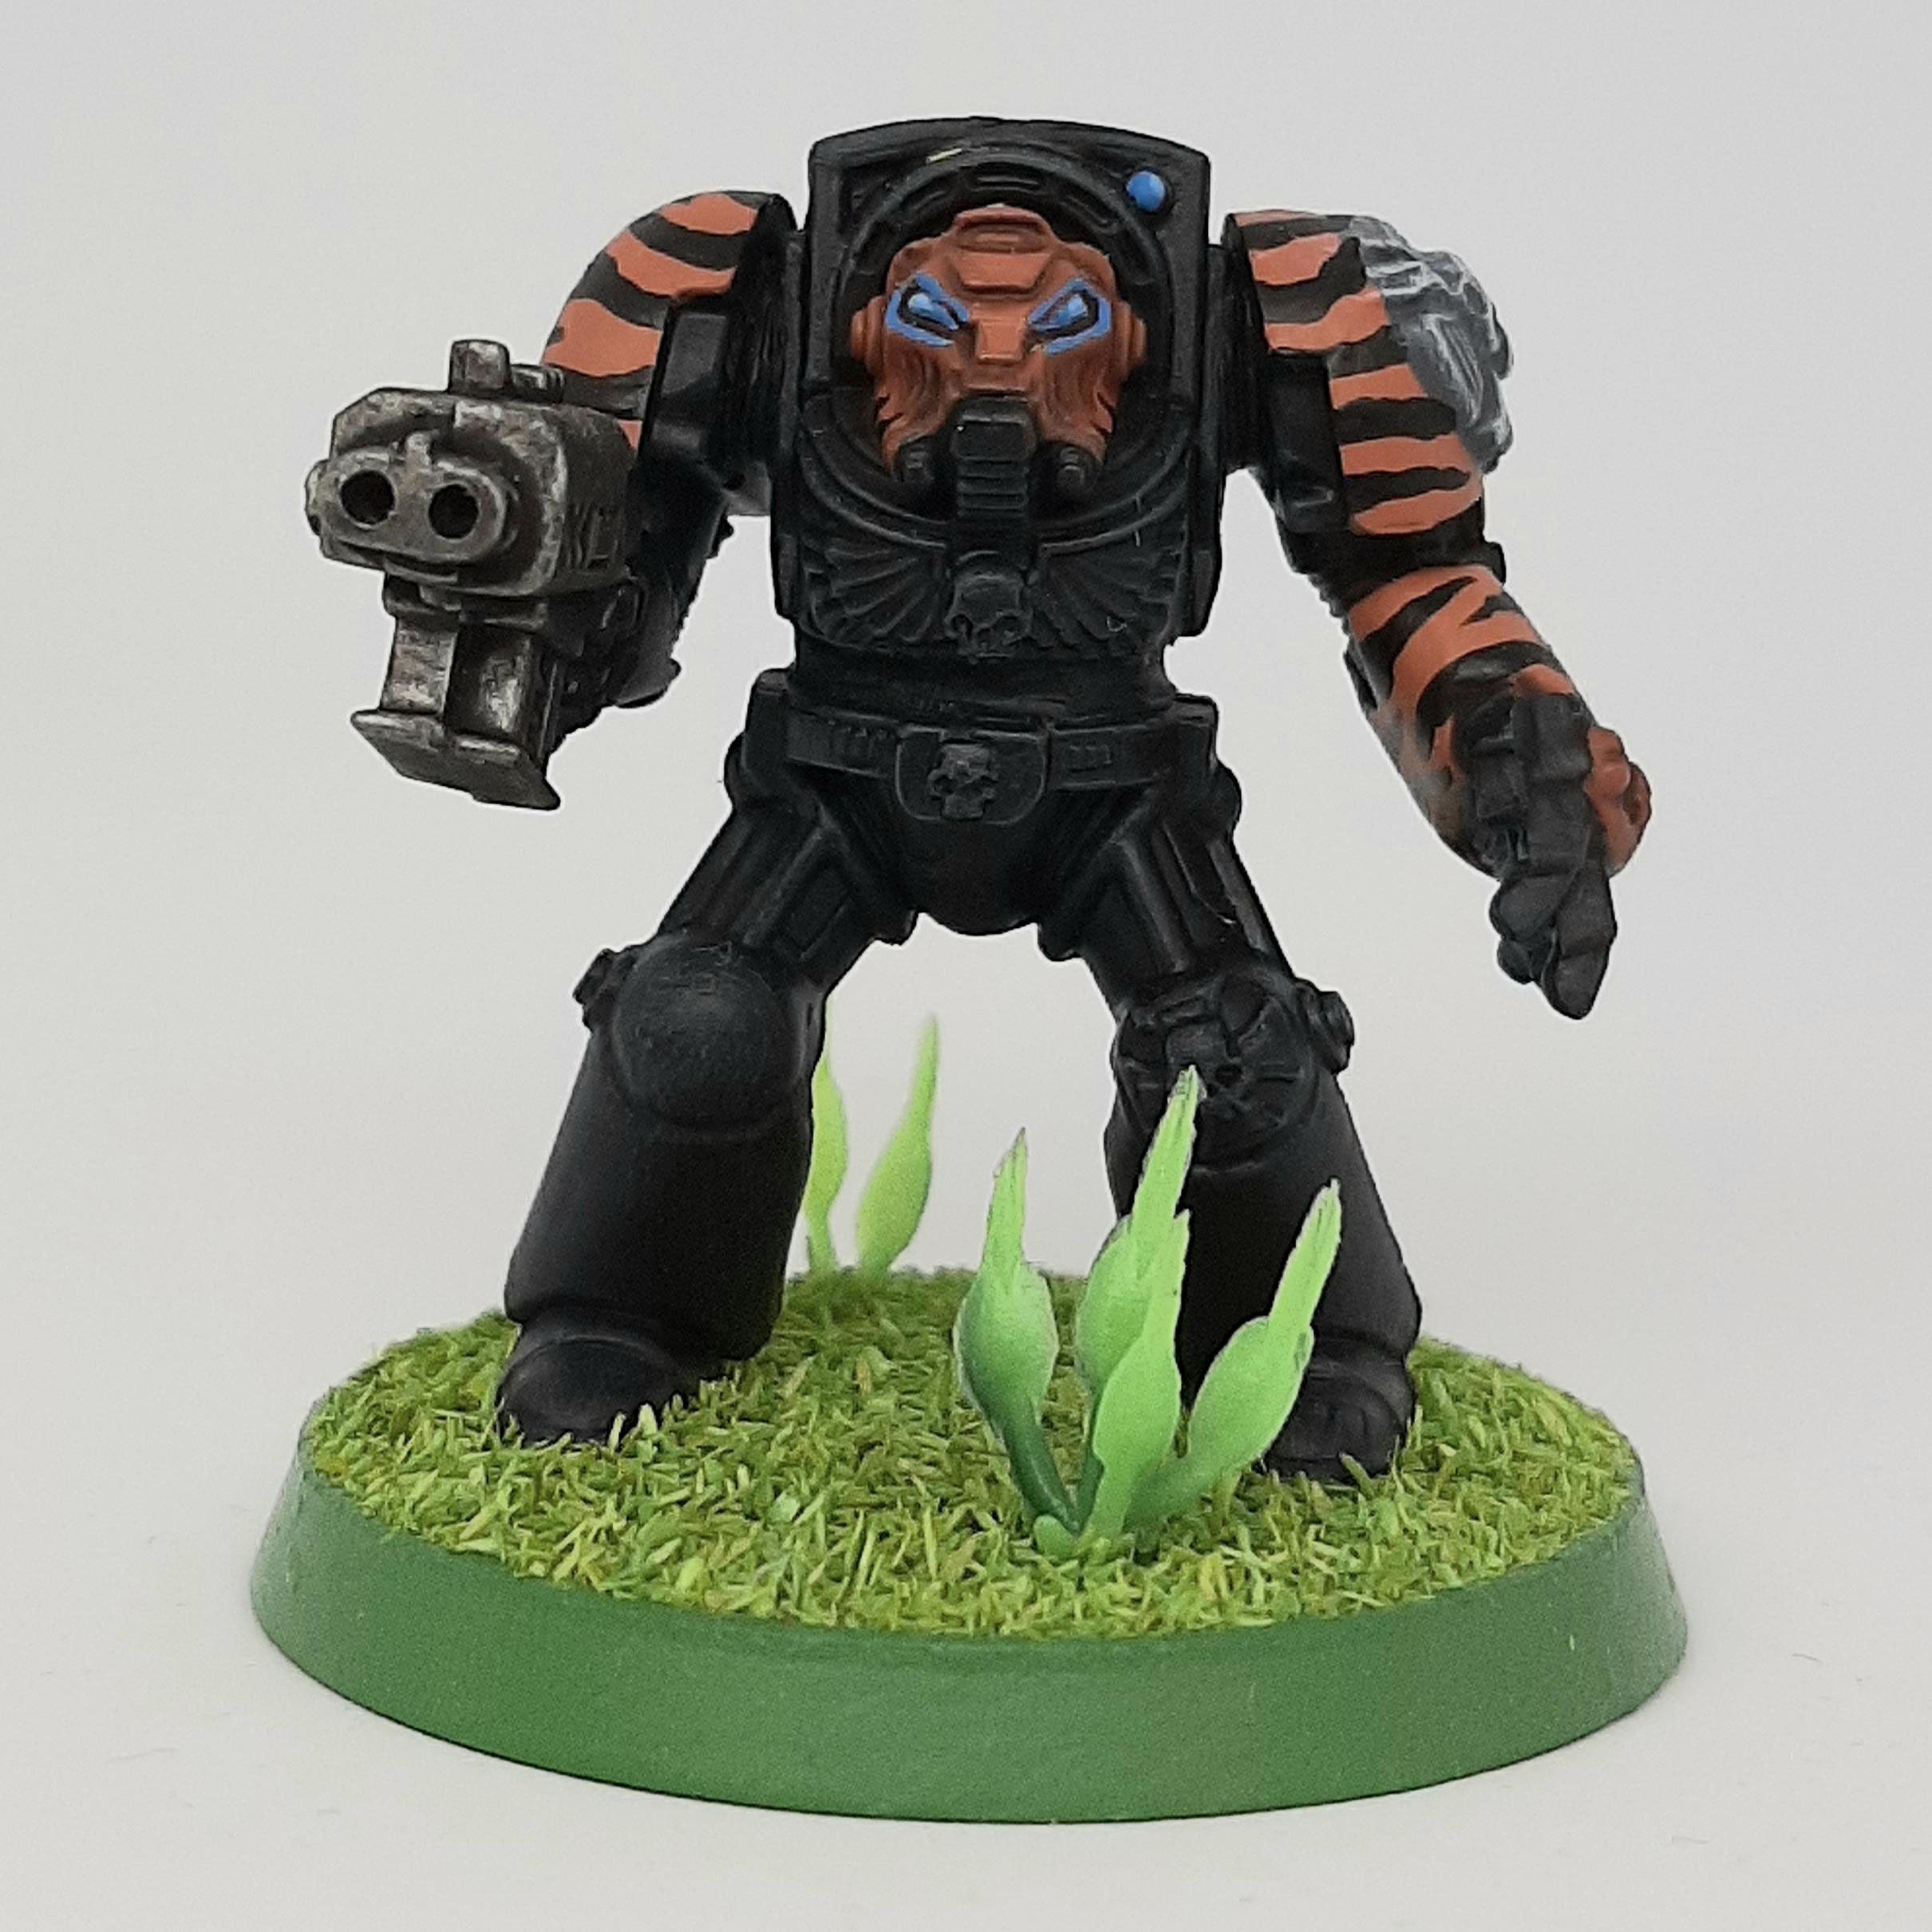 Adeptus, Astartes, Camouflage, Conversion, Custom, Fighting, Forest, India, Jungle, Kitbash, Power Fist, Saber, Space, Space Marines, Stormbolter, Terminator Armor, Tigers, Veda, Vedic